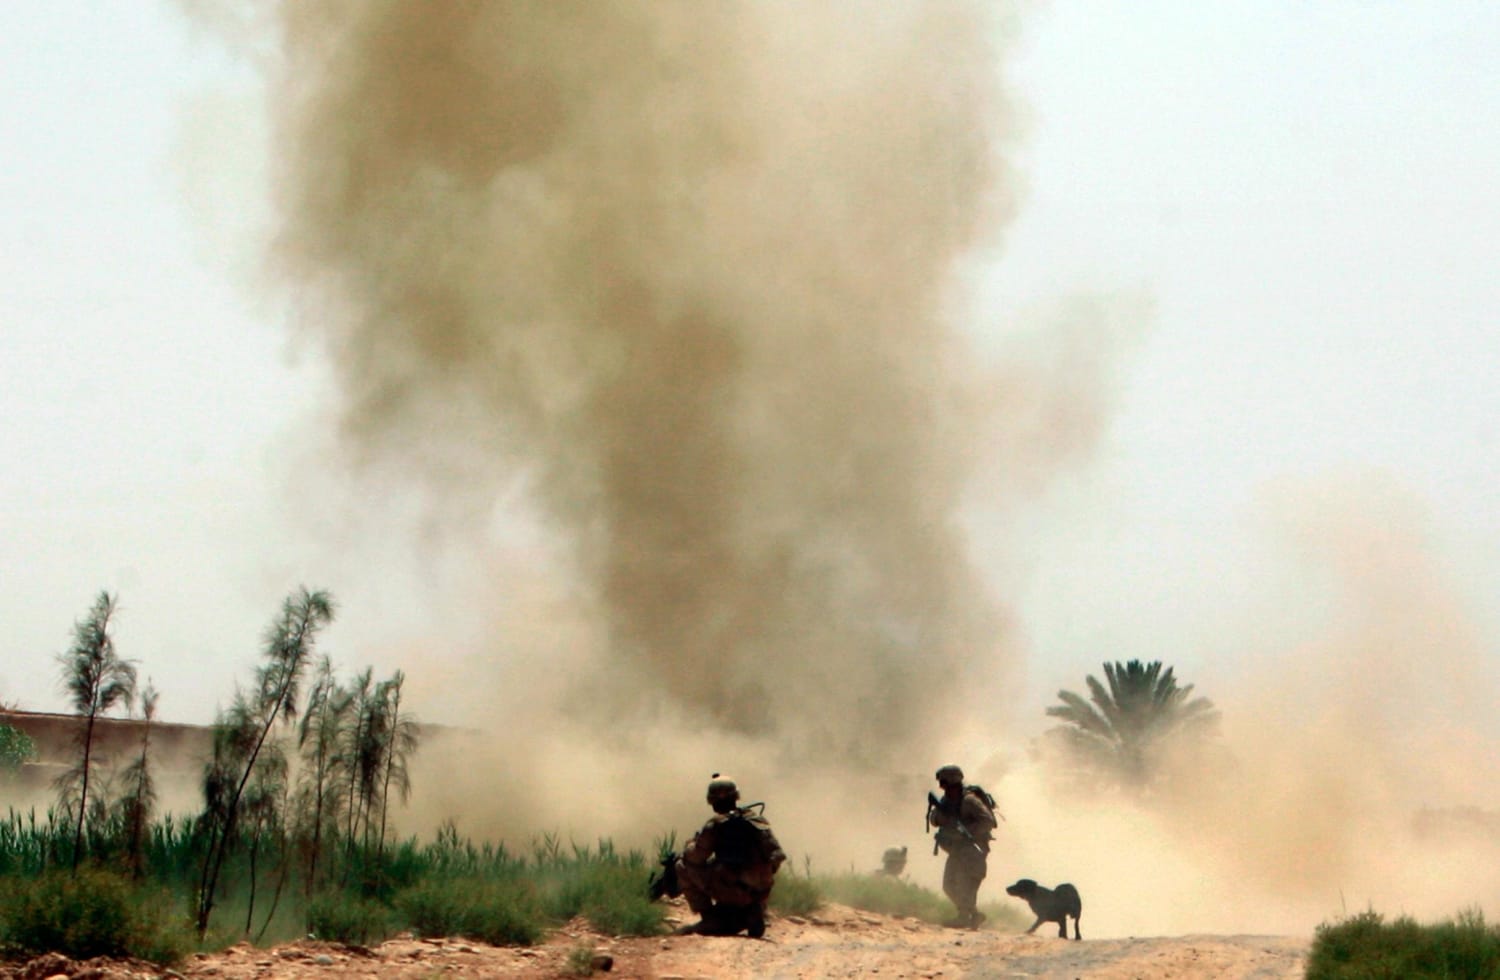 IED Shockwaves Inject Hidden Damage in Troops, Study Claims - NBC News2420 x 1581